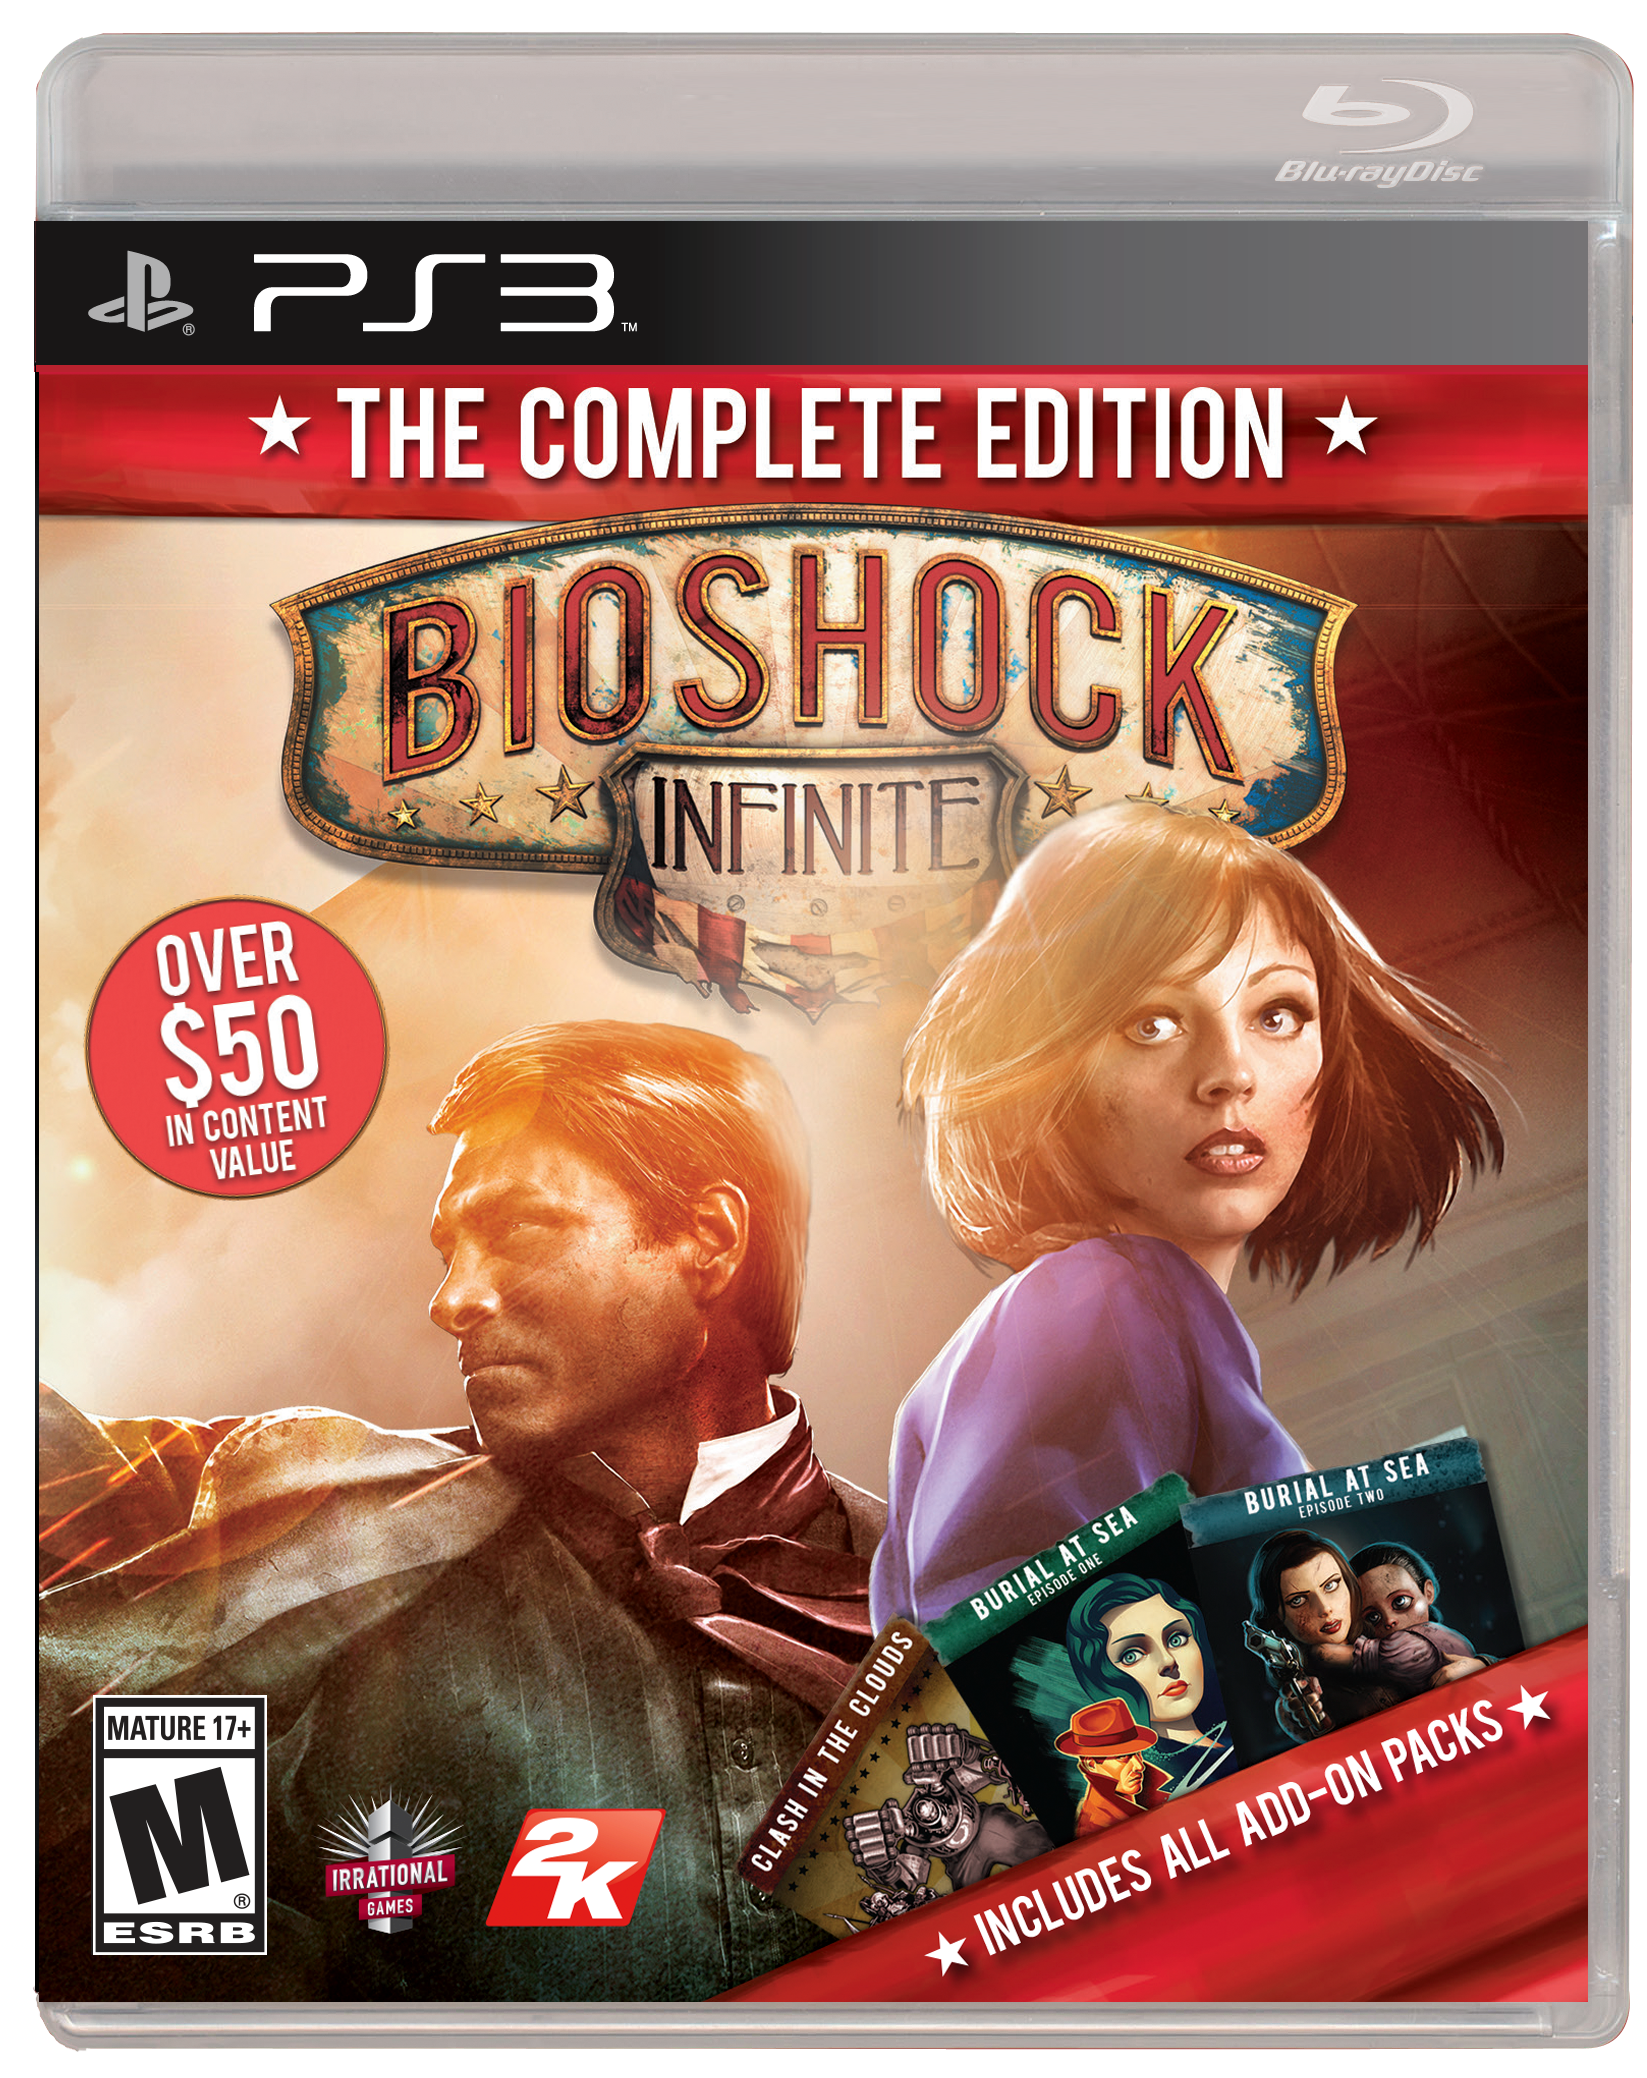 BioShock Infinite: The Complete Edition - PlayStation 3